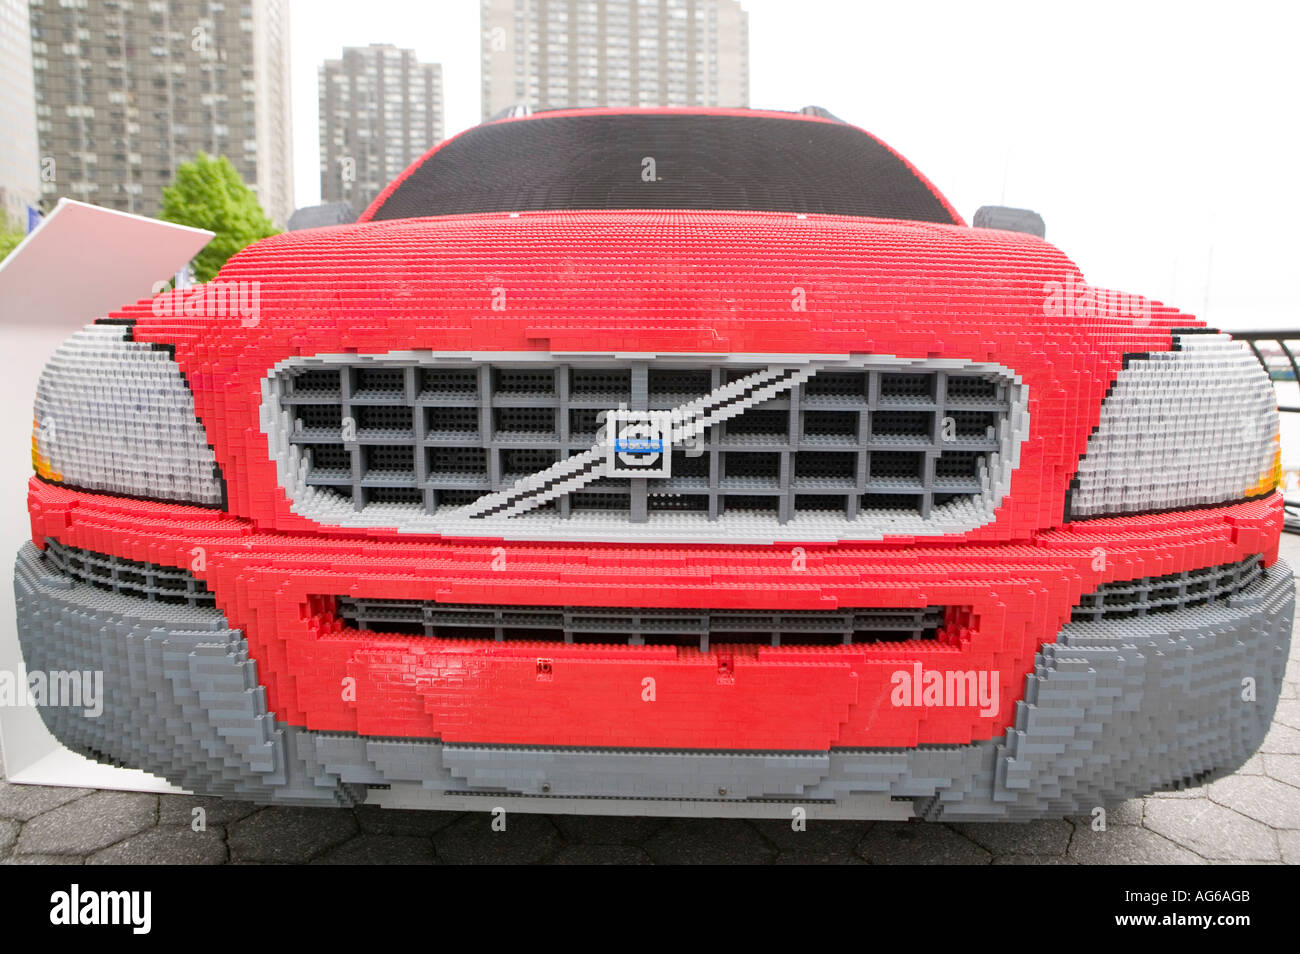 Full scale Volvo XC90 car replica made of Lego on display in New York USA May 2006 Stock Photo